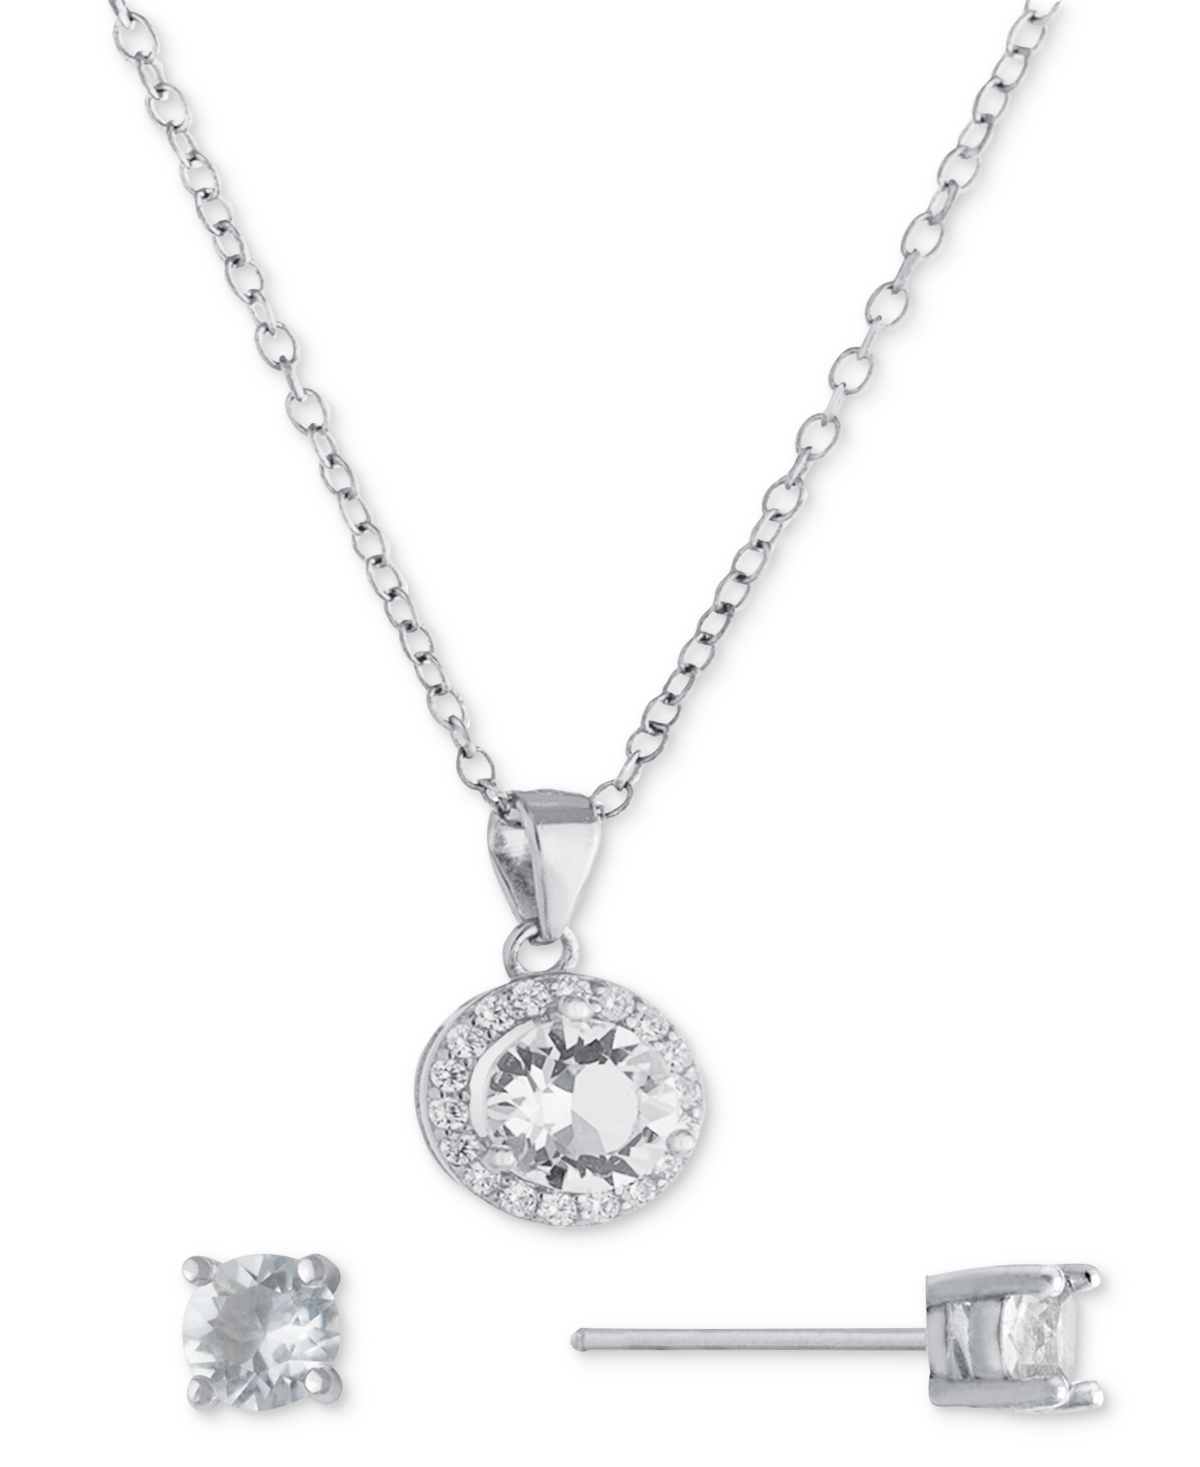 2-Pc. Set Crystal & Cubic Zirconia Halo Pendant Necklace & Solitaire Stud Earrings, Created for Macy's - Rose